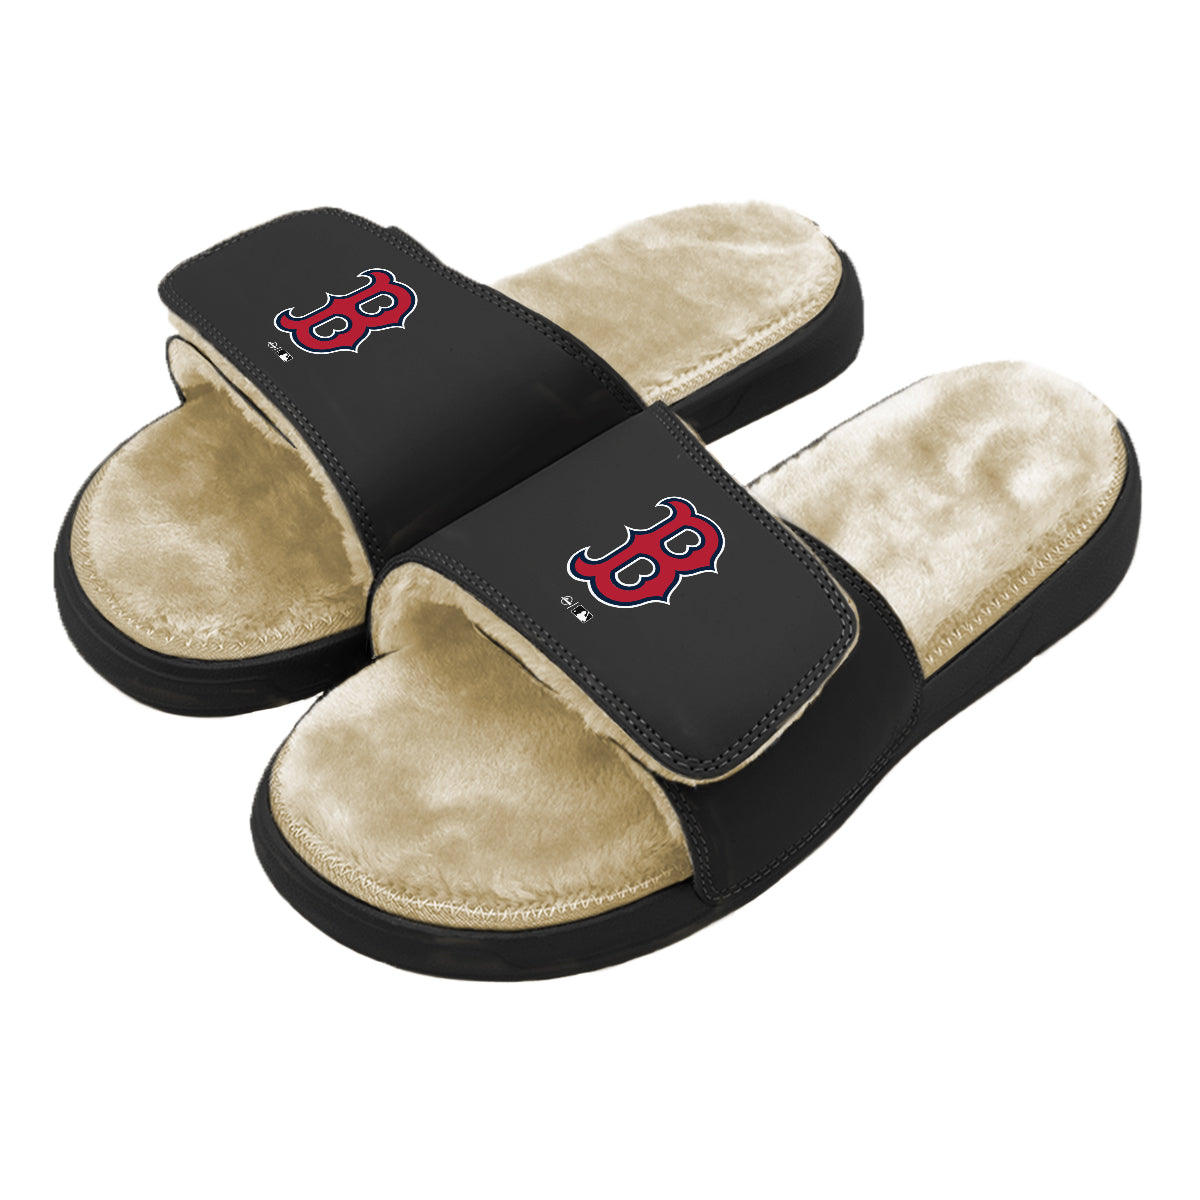 Islides Official - Boston Red Sox Primary Pink 8 / Pink Slides - Sandals - Slippers